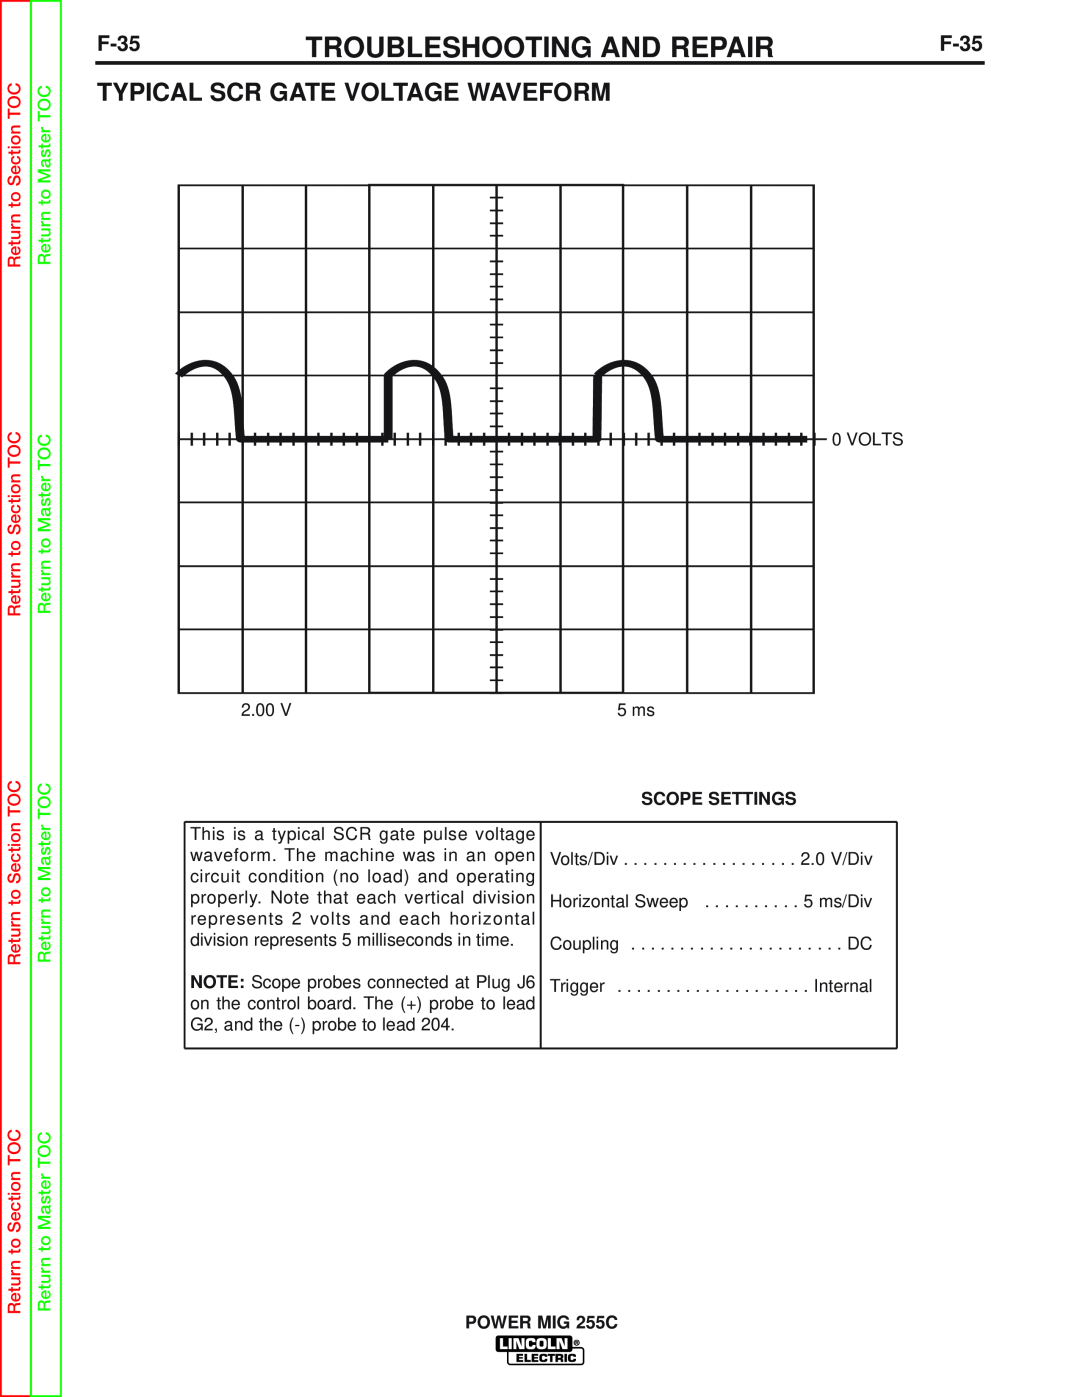 Lincoln Electric SVM170-A Typical Scr Gate Voltage Waveform, F-35, Troubleshooting And Repair, Return to Section TOC 